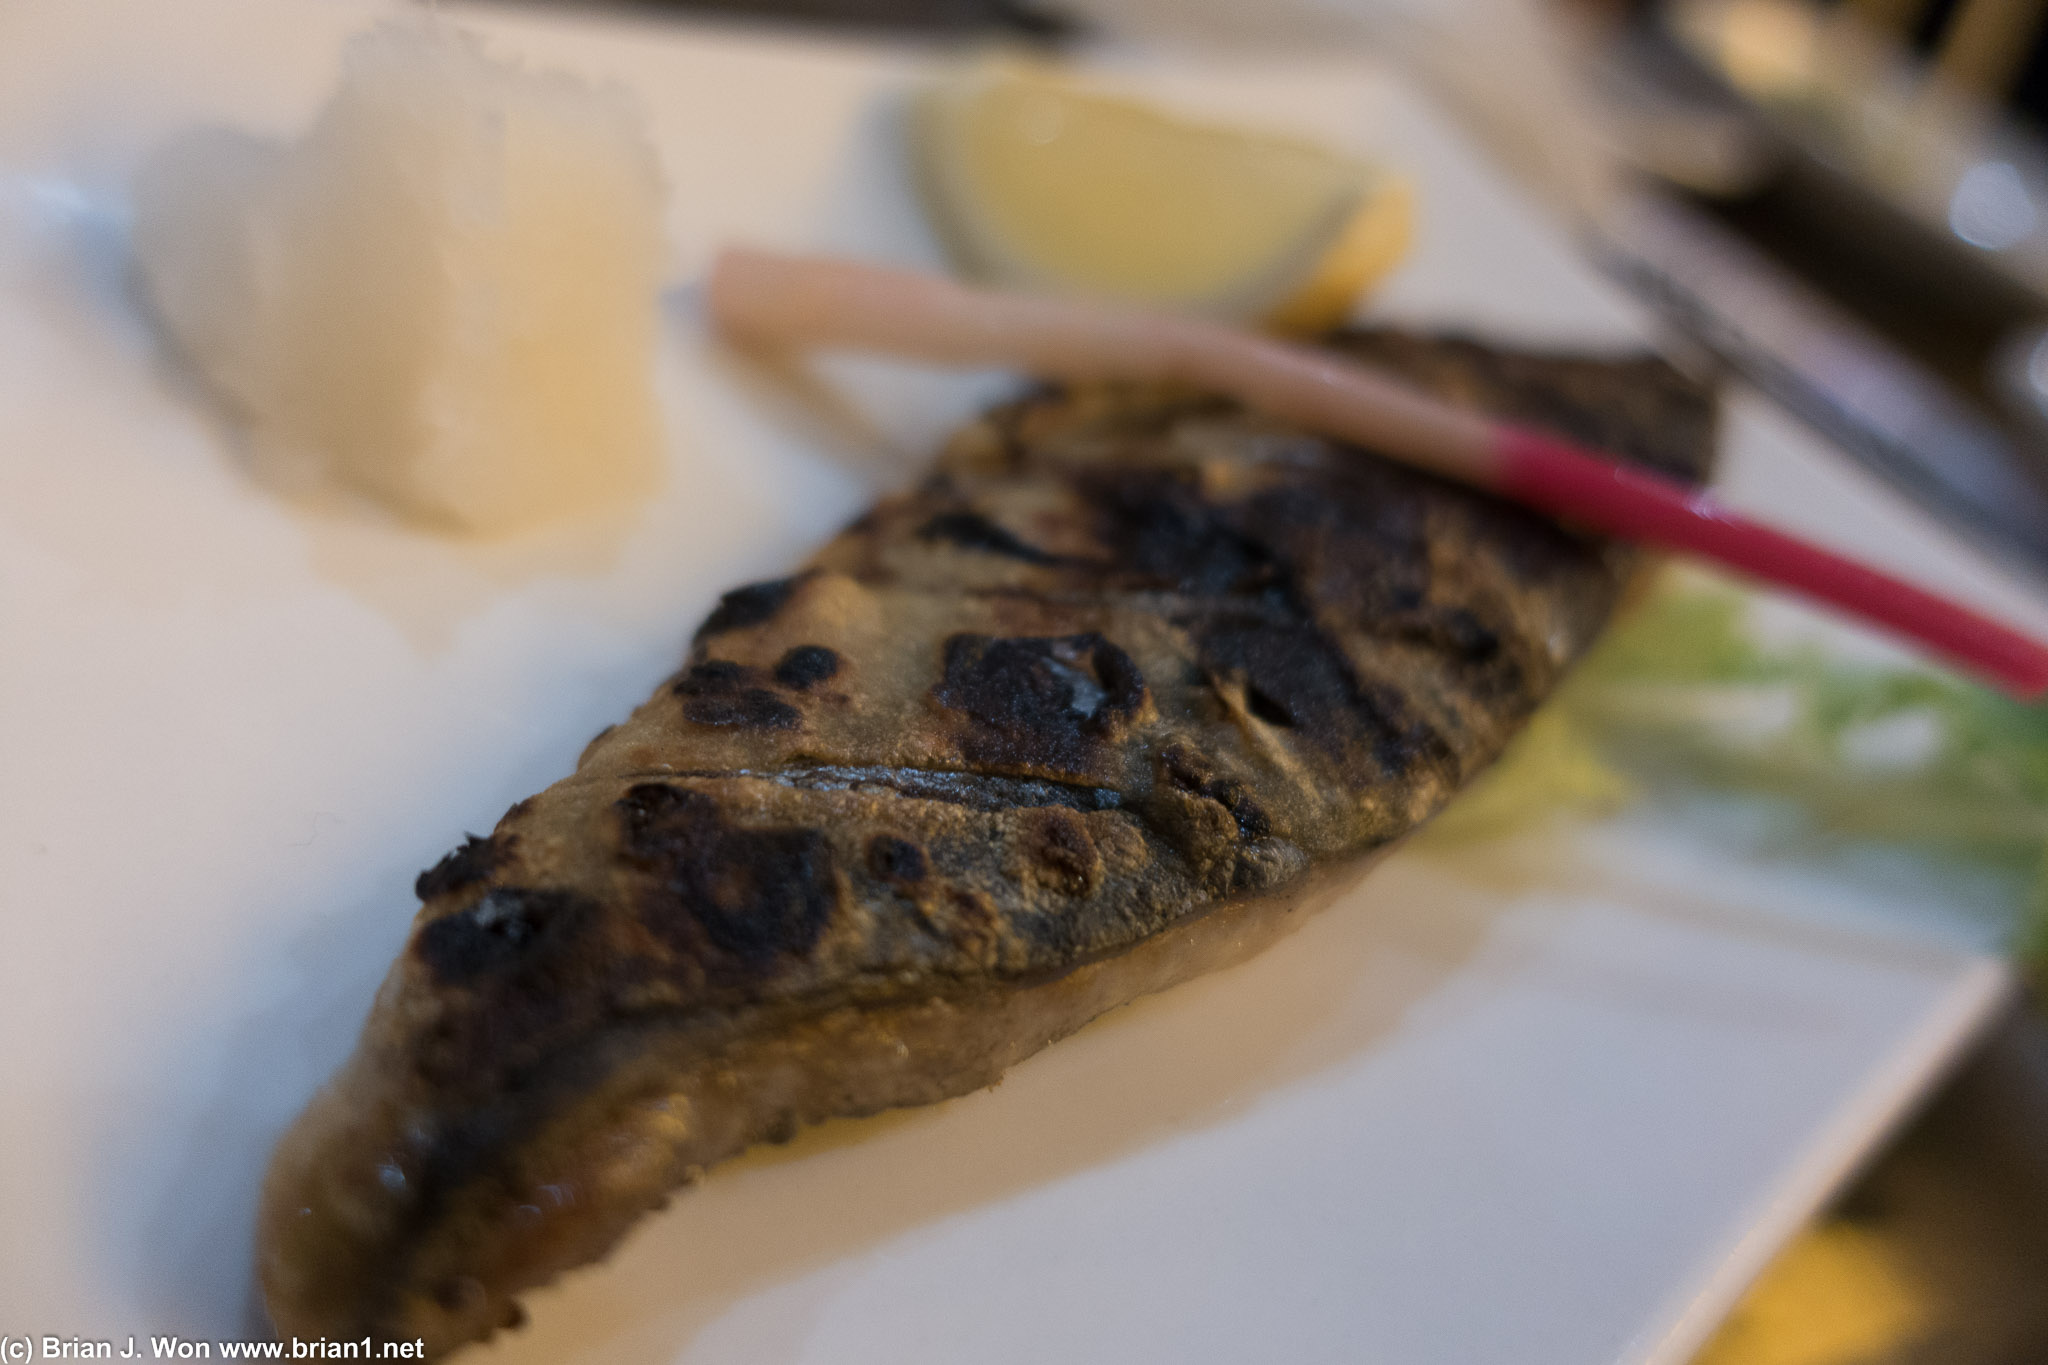 Grilled mackerel, the whole reason for the trip.